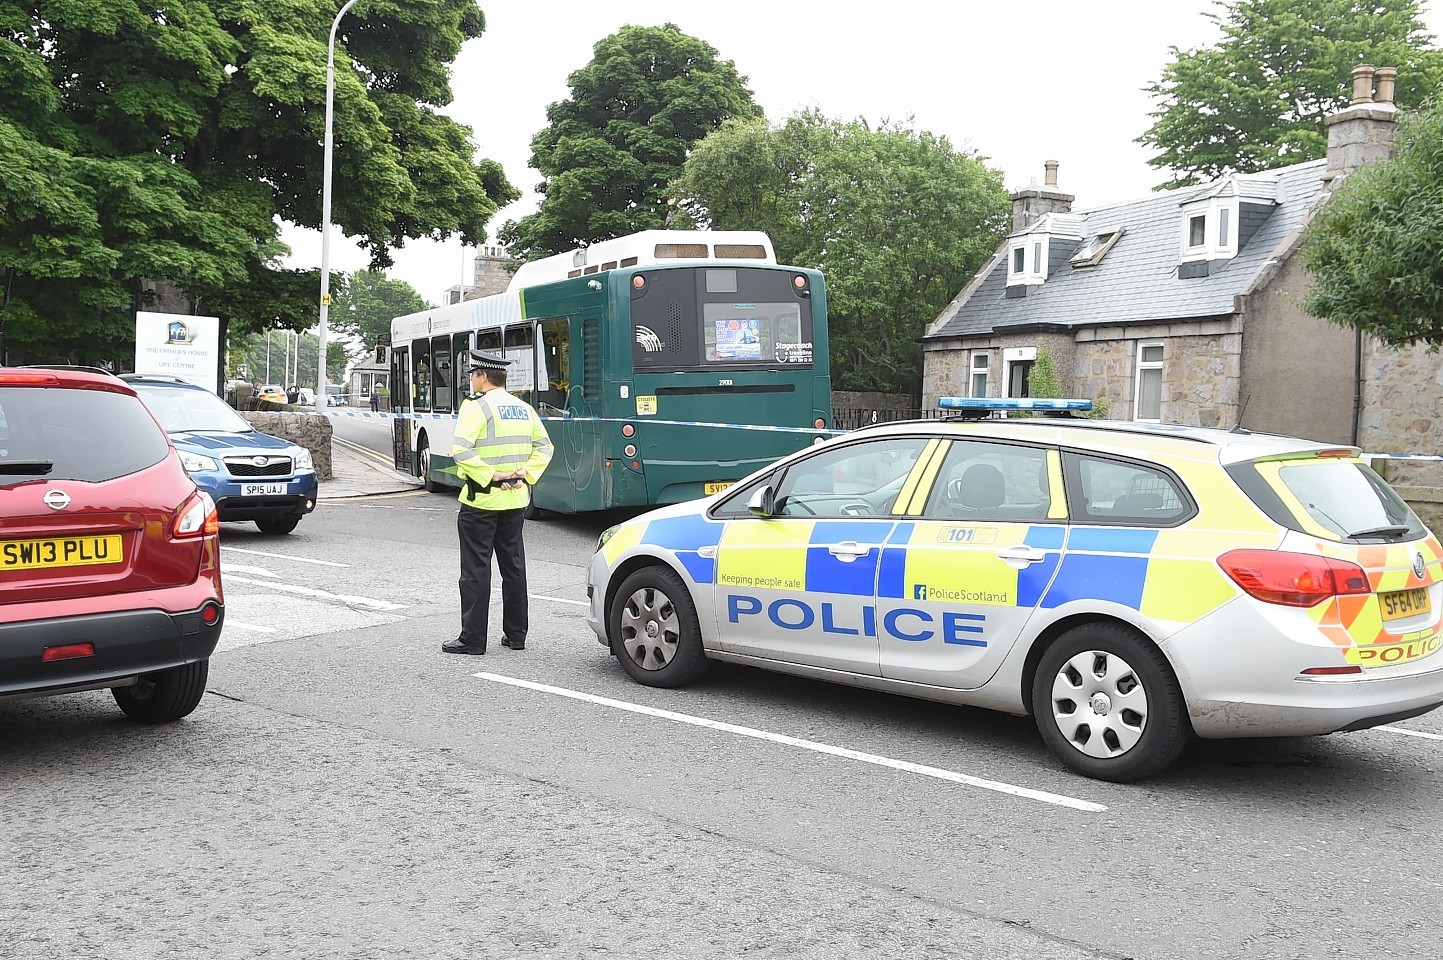 The woman was taken to Aberdeen Royal Infirmary after being hit by a bus